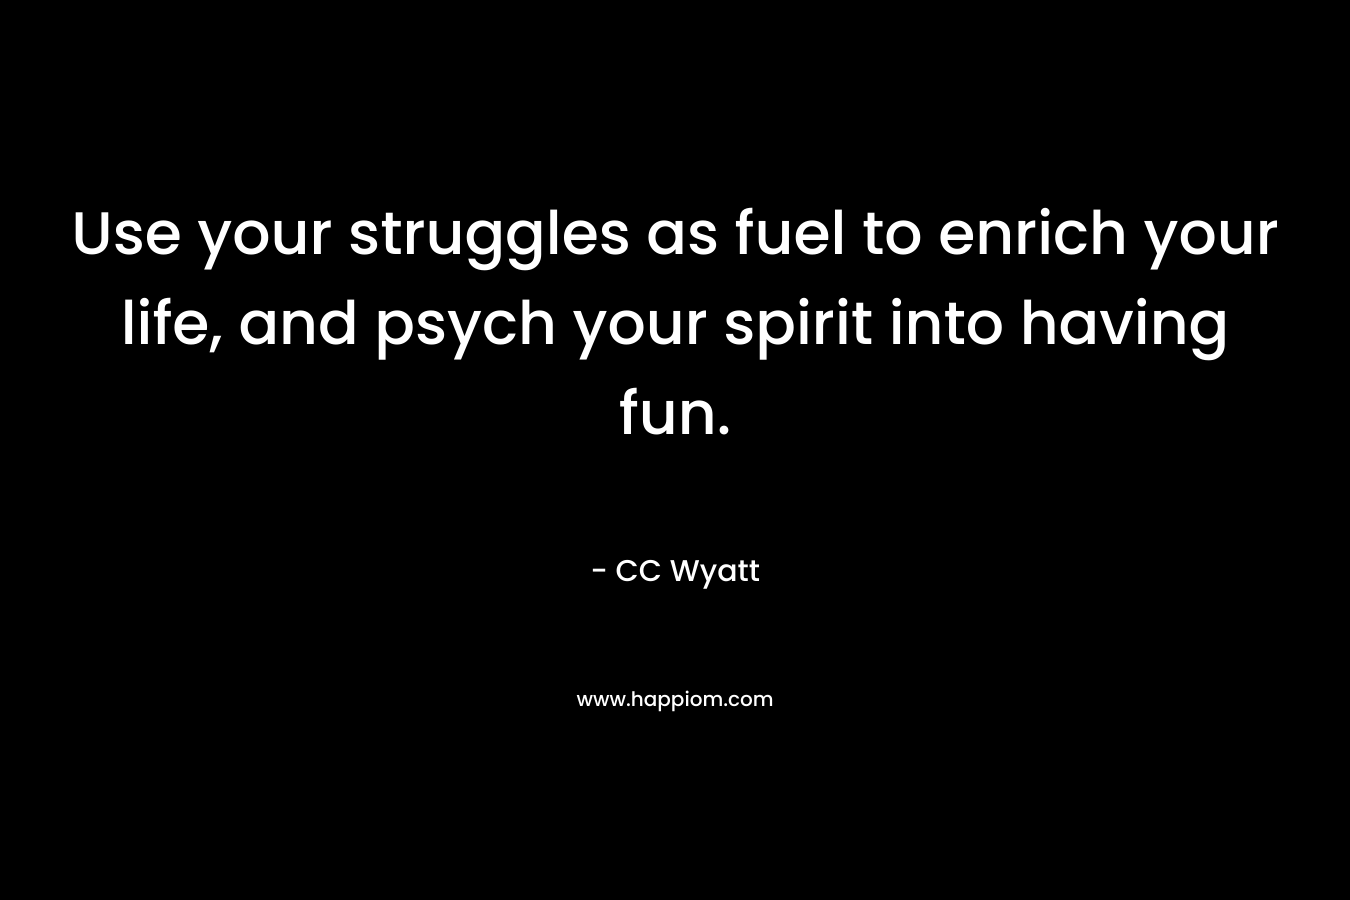 Use your struggles as fuel to enrich your life, and psych your spirit into having fun. – CC Wyatt